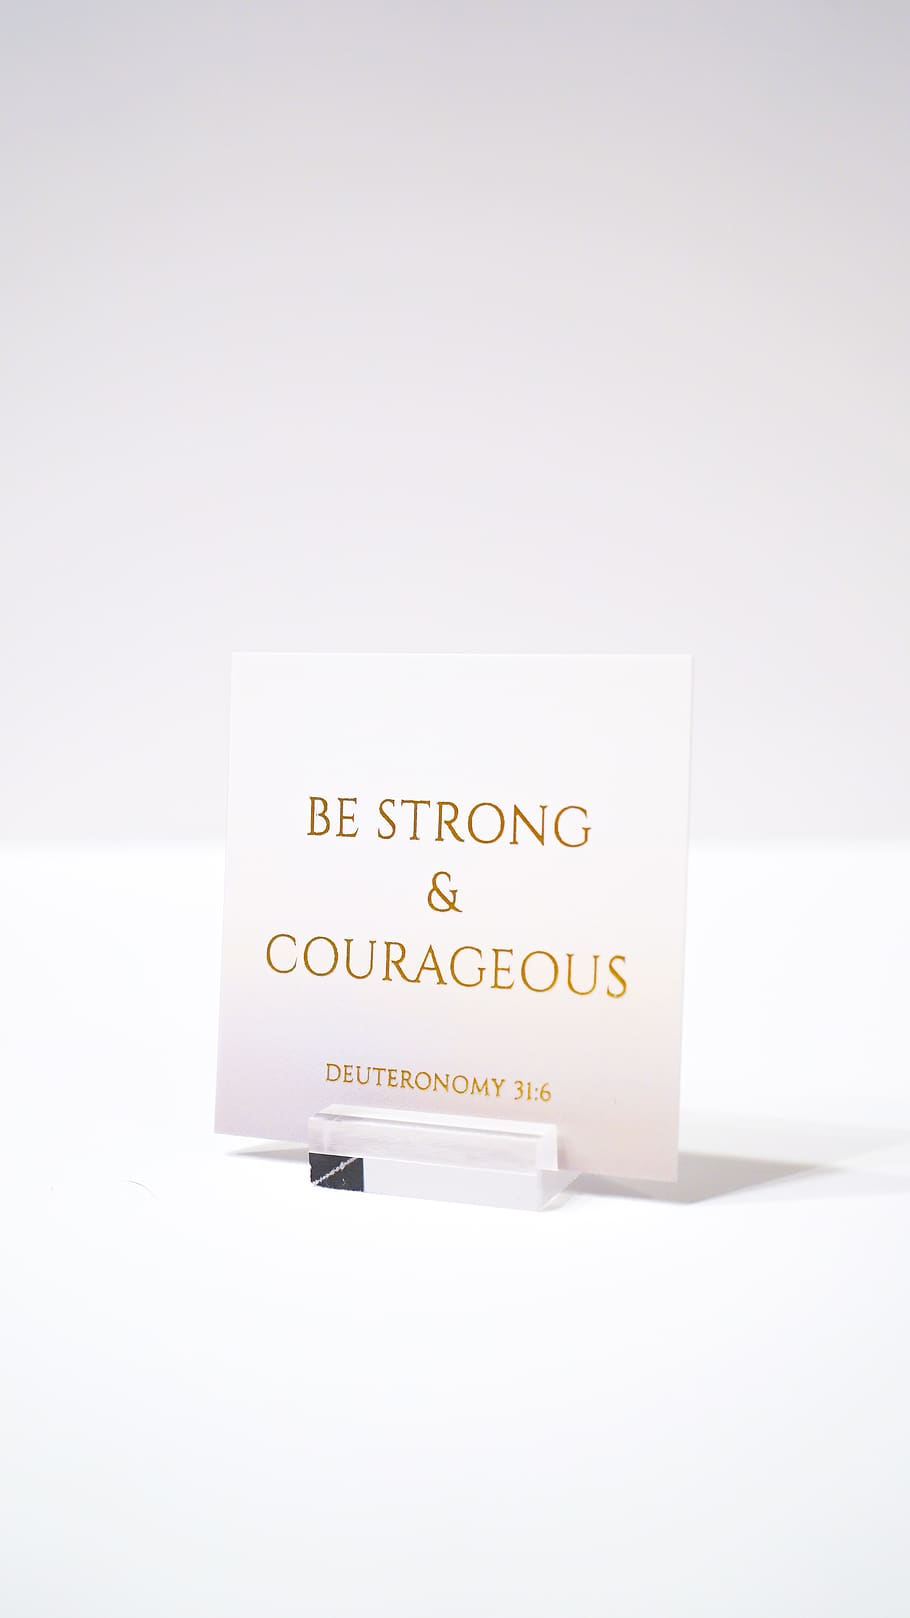 white paper with be strong and courageous printed text, studio shot